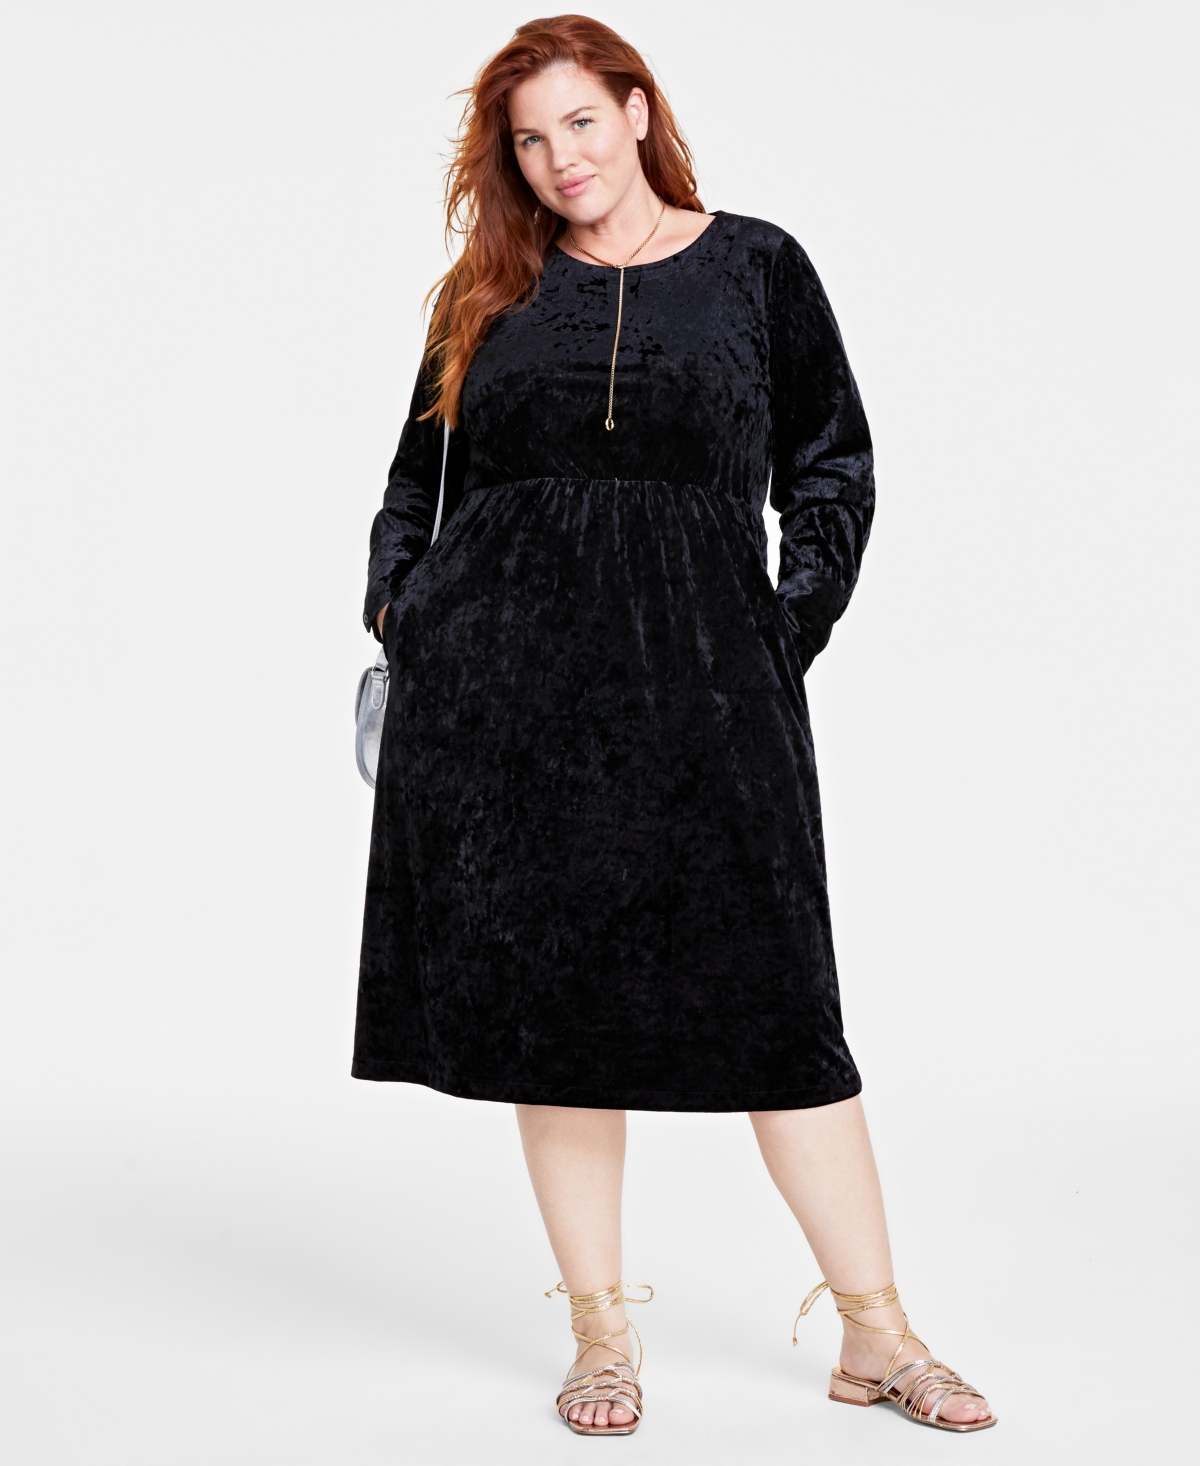 ON 34TH PLUS SIZE CRUSHED VELVET MIDI DRESS, CREATED FOR MACY'S